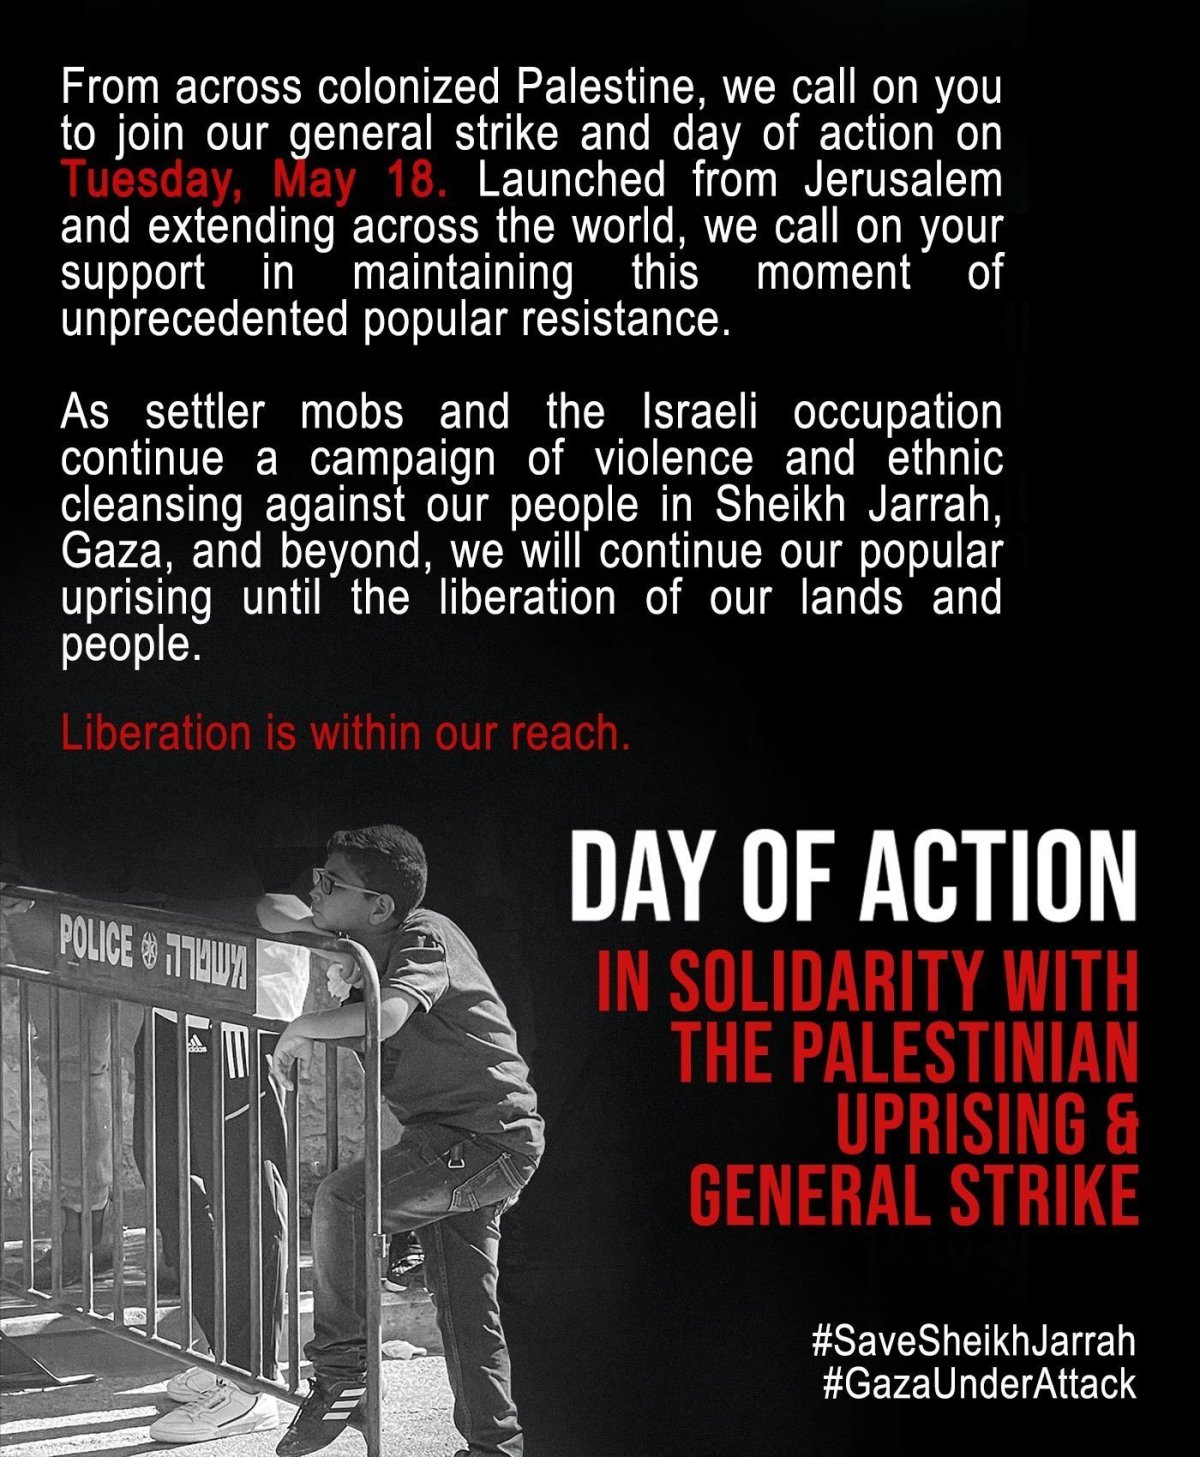 http://www.jewworldorder.org/wp-content/uploads/2021/05/day-of-action-in-solidarity-with-the-palestinian-uprising-tuesday-may-18.jpg